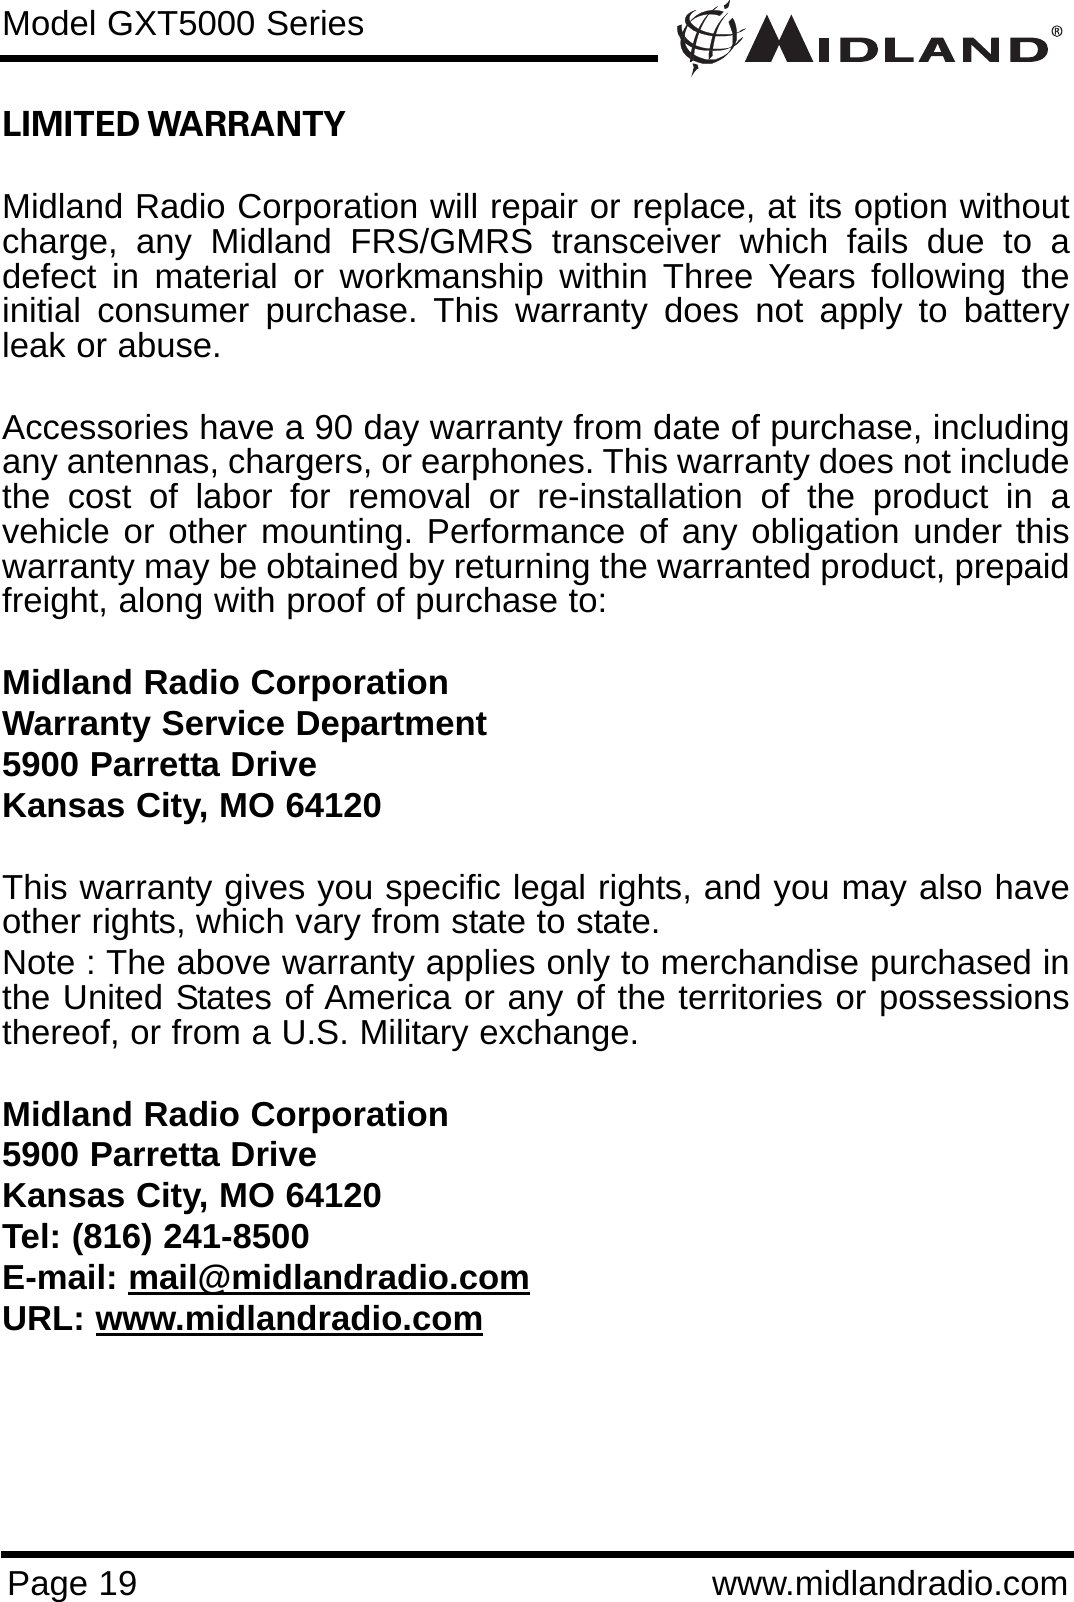 Page 19 www.midlandradio.comLIMITED WARRANTY Midland Radio Corporation will repair or replace, at its option withoutcharge, any Midland FRS/GMRS transceiver which fails due to adefect in material or workmanship within Three Years following theinitial consumer purchase. This warranty does not apply to batteryleak or abuse.Accessories have a 90 day warranty from date of purchase, includingany antennas, chargers, or earphones. This warranty does not includethe cost of labor for removal or re-installation of the product in avehicle or other mounting. Performance of any obligation under thiswarranty may be obtained by returning the warranted product, prepaidfreight, along with proof of purchase to:Midland Radio CorporationWarranty Service Department5900 Parretta DriveKansas City, MO 64120This warranty gives you specific legal rights, and you may also haveother rights, which vary from state to state.Note : The above warranty applies only to merchandise purchased inthe United States of America or any of the territories or possessionsthereof, or from a U.S. Military exchange.Midland Radio Corporation5900 Parretta DriveKansas City, MO 64120Tel: (816) 241-8500E-mail: mail@midlandradio.comURL: www.midlandradio.comModel GXT5000 Series